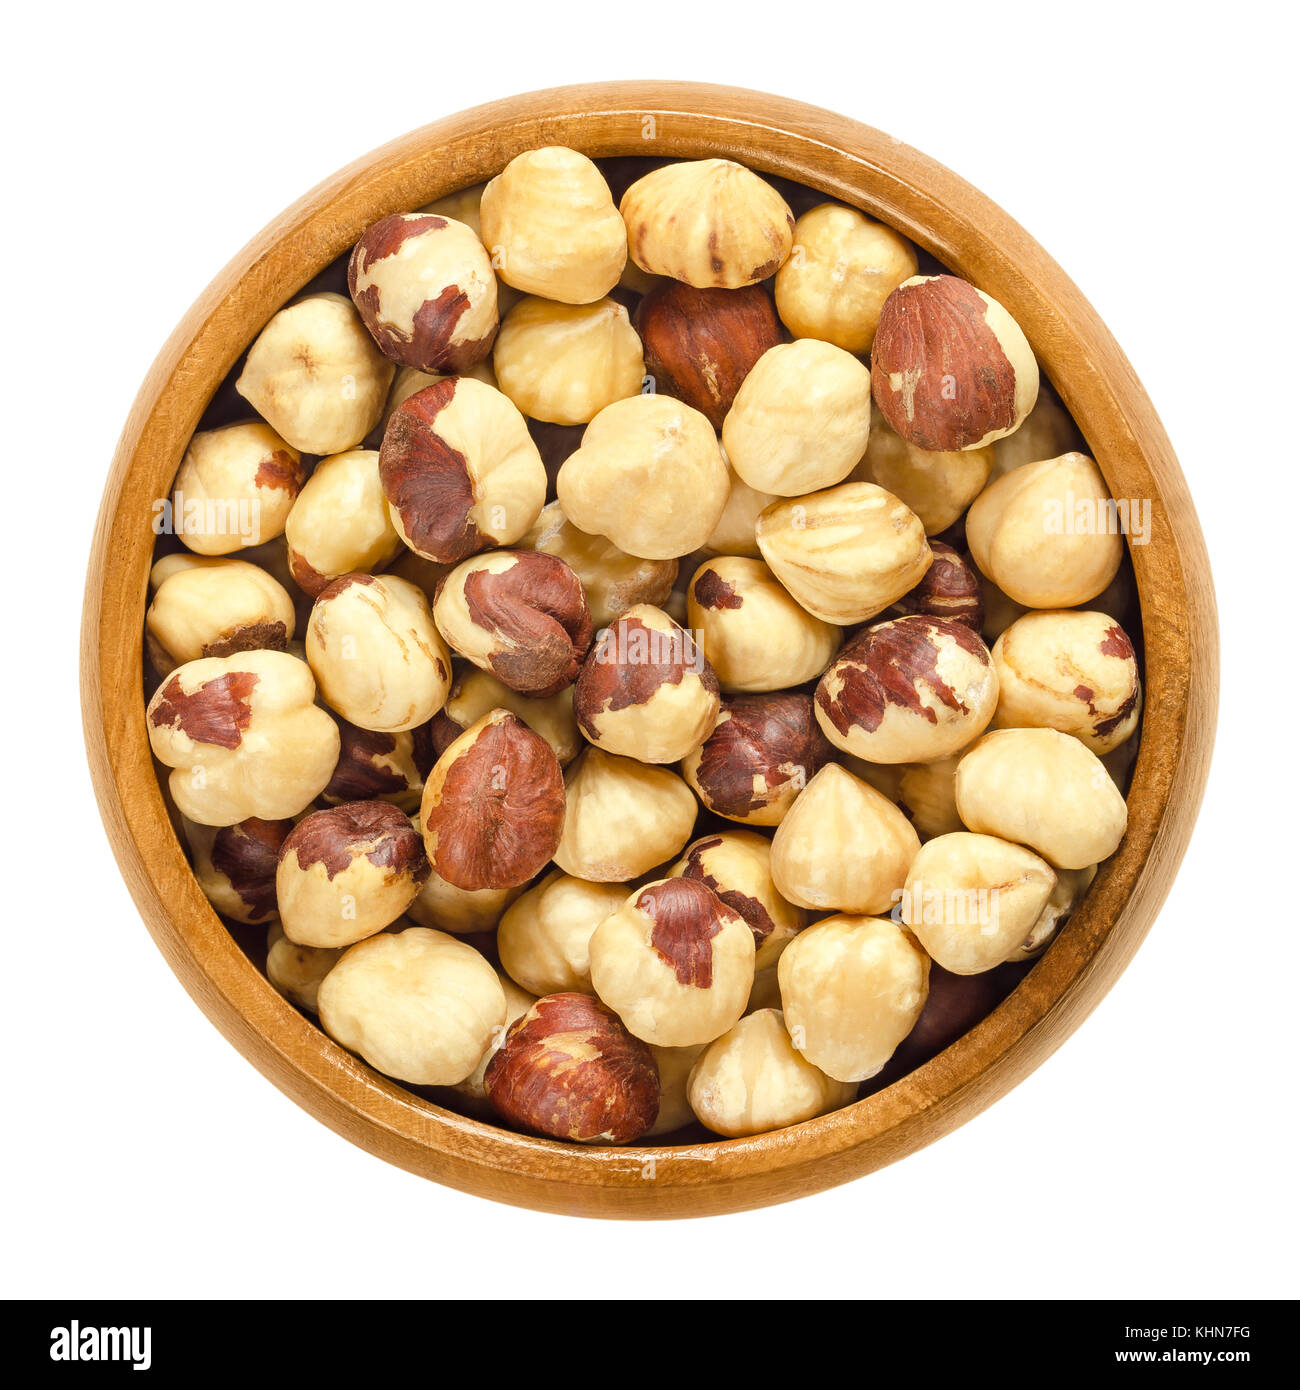 Roasted hazelnuts in wooden bowl. Crisp toasted nuts of the hazel. Shelled whole seeds of cobnuts or filbert nuts, Corylus avellana. Macro food photo. Stock Photo